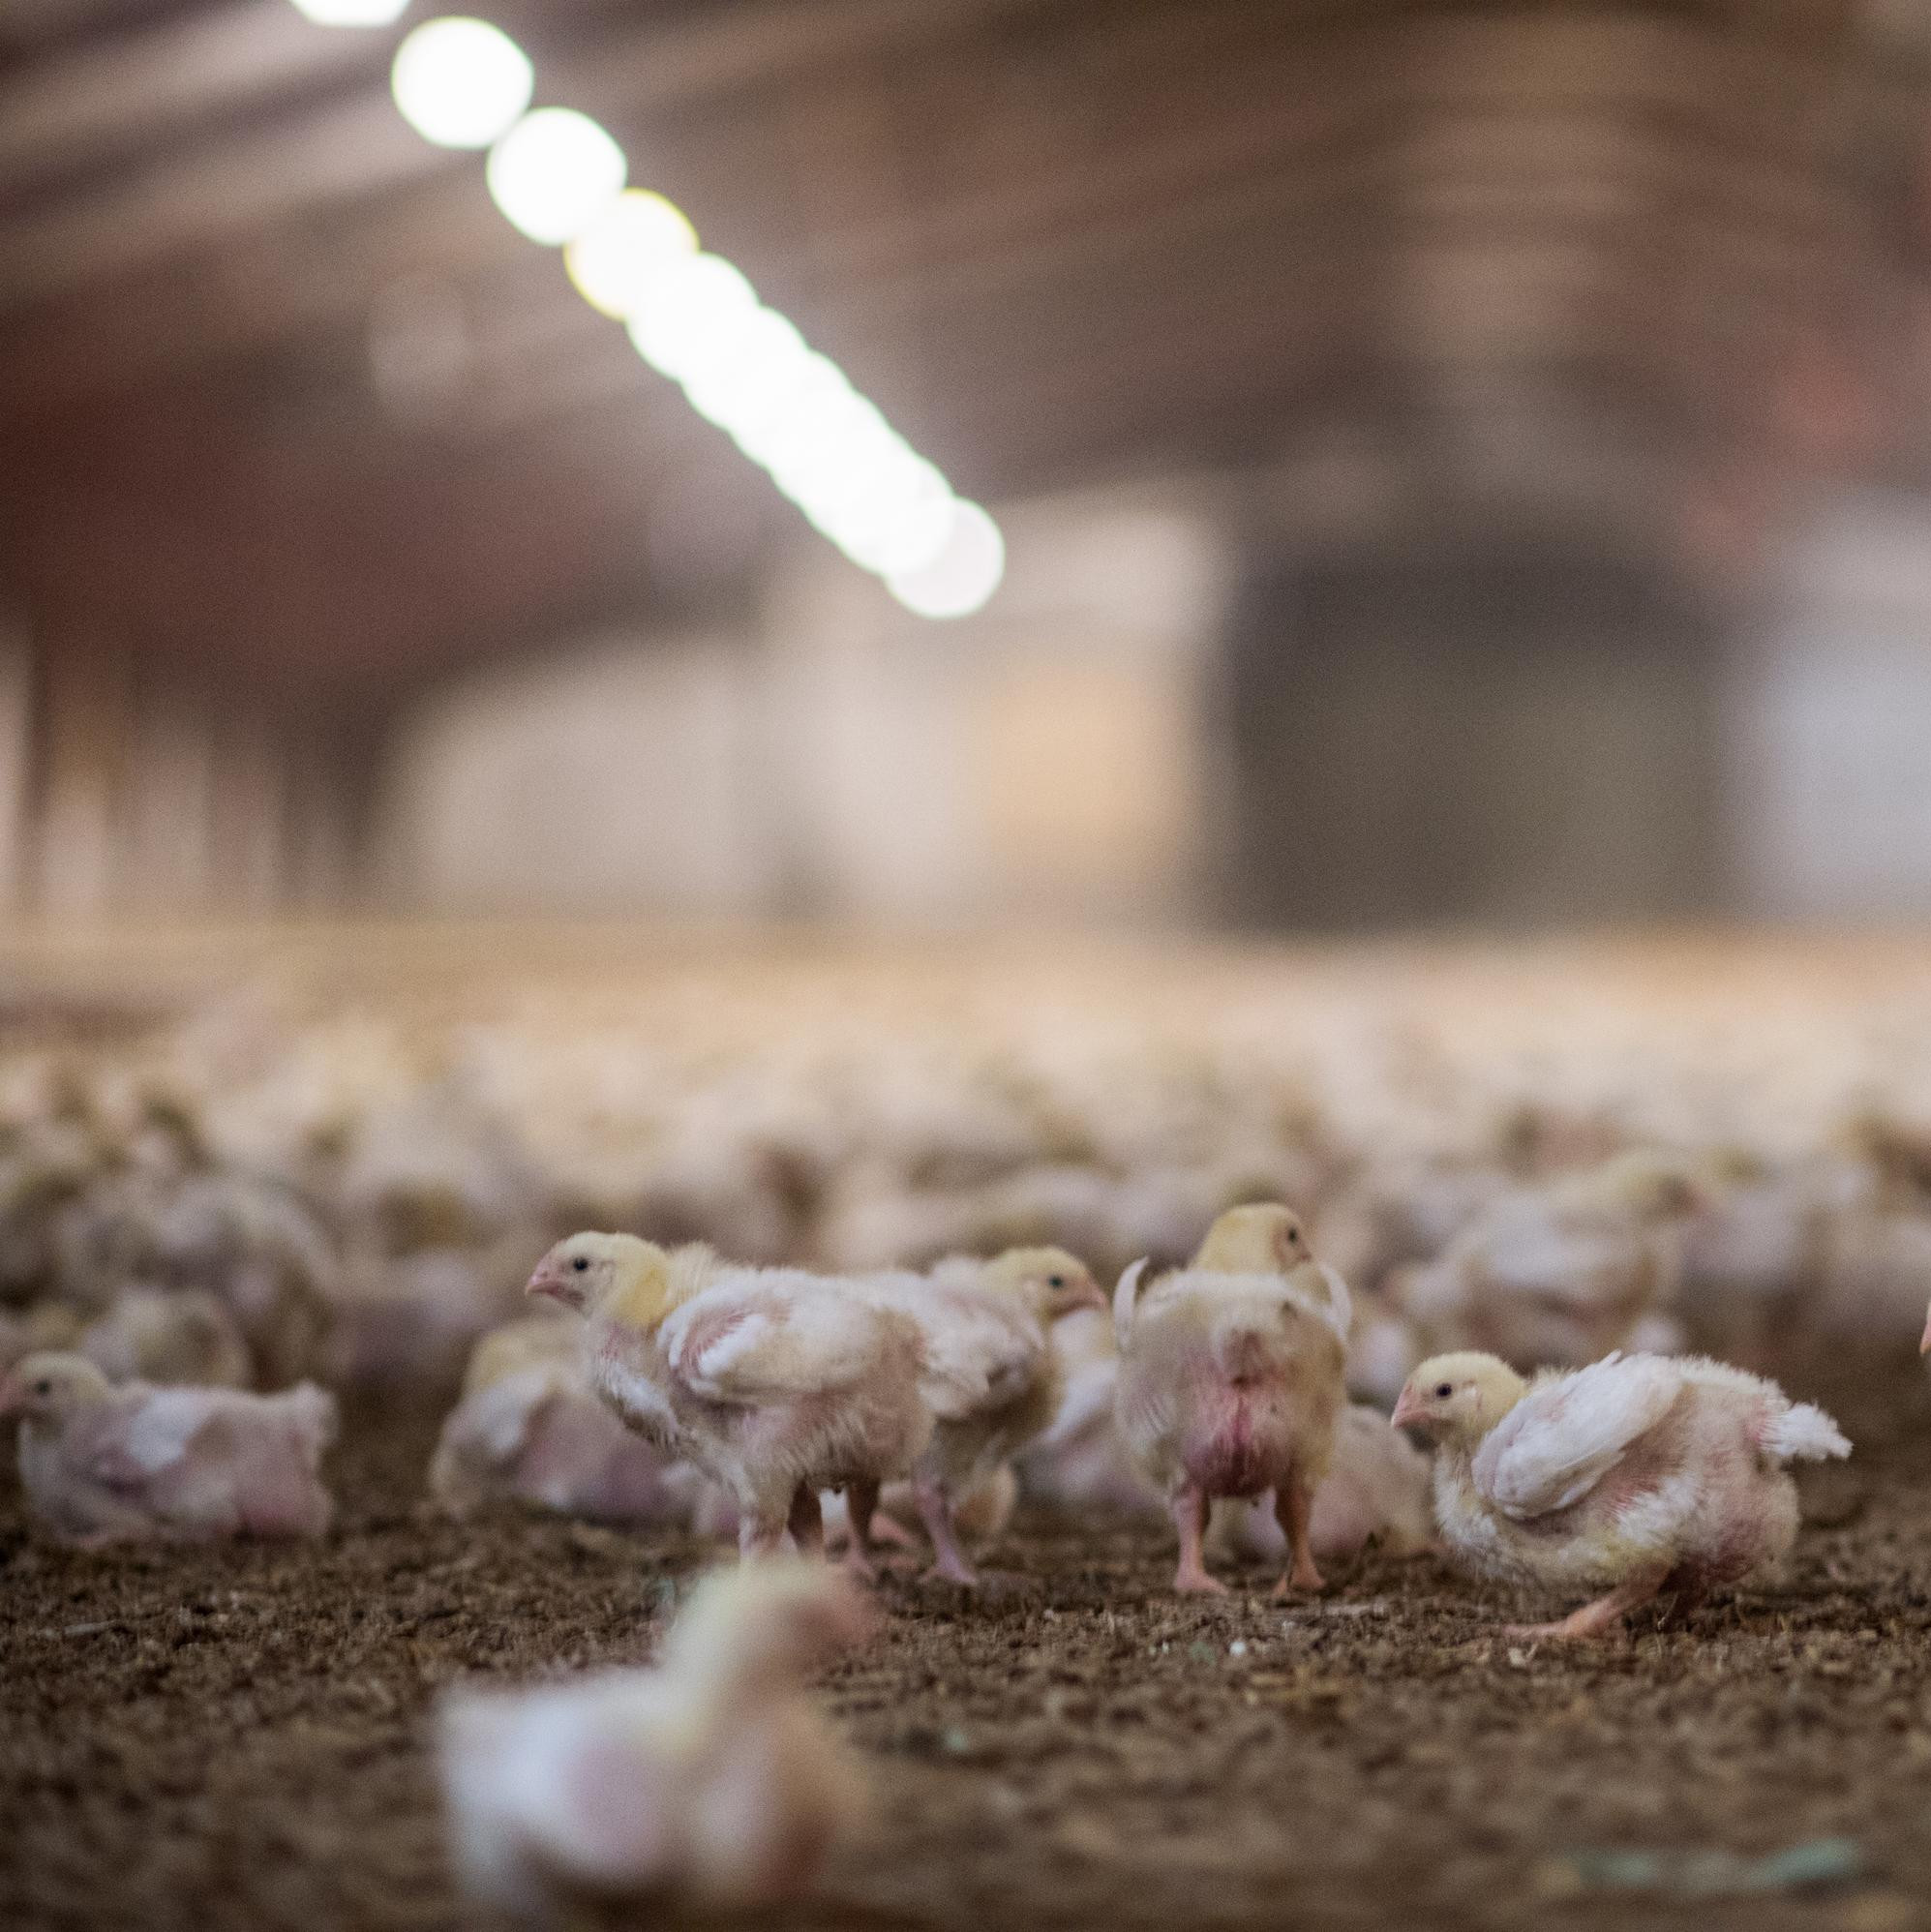 Chickens in factory farming